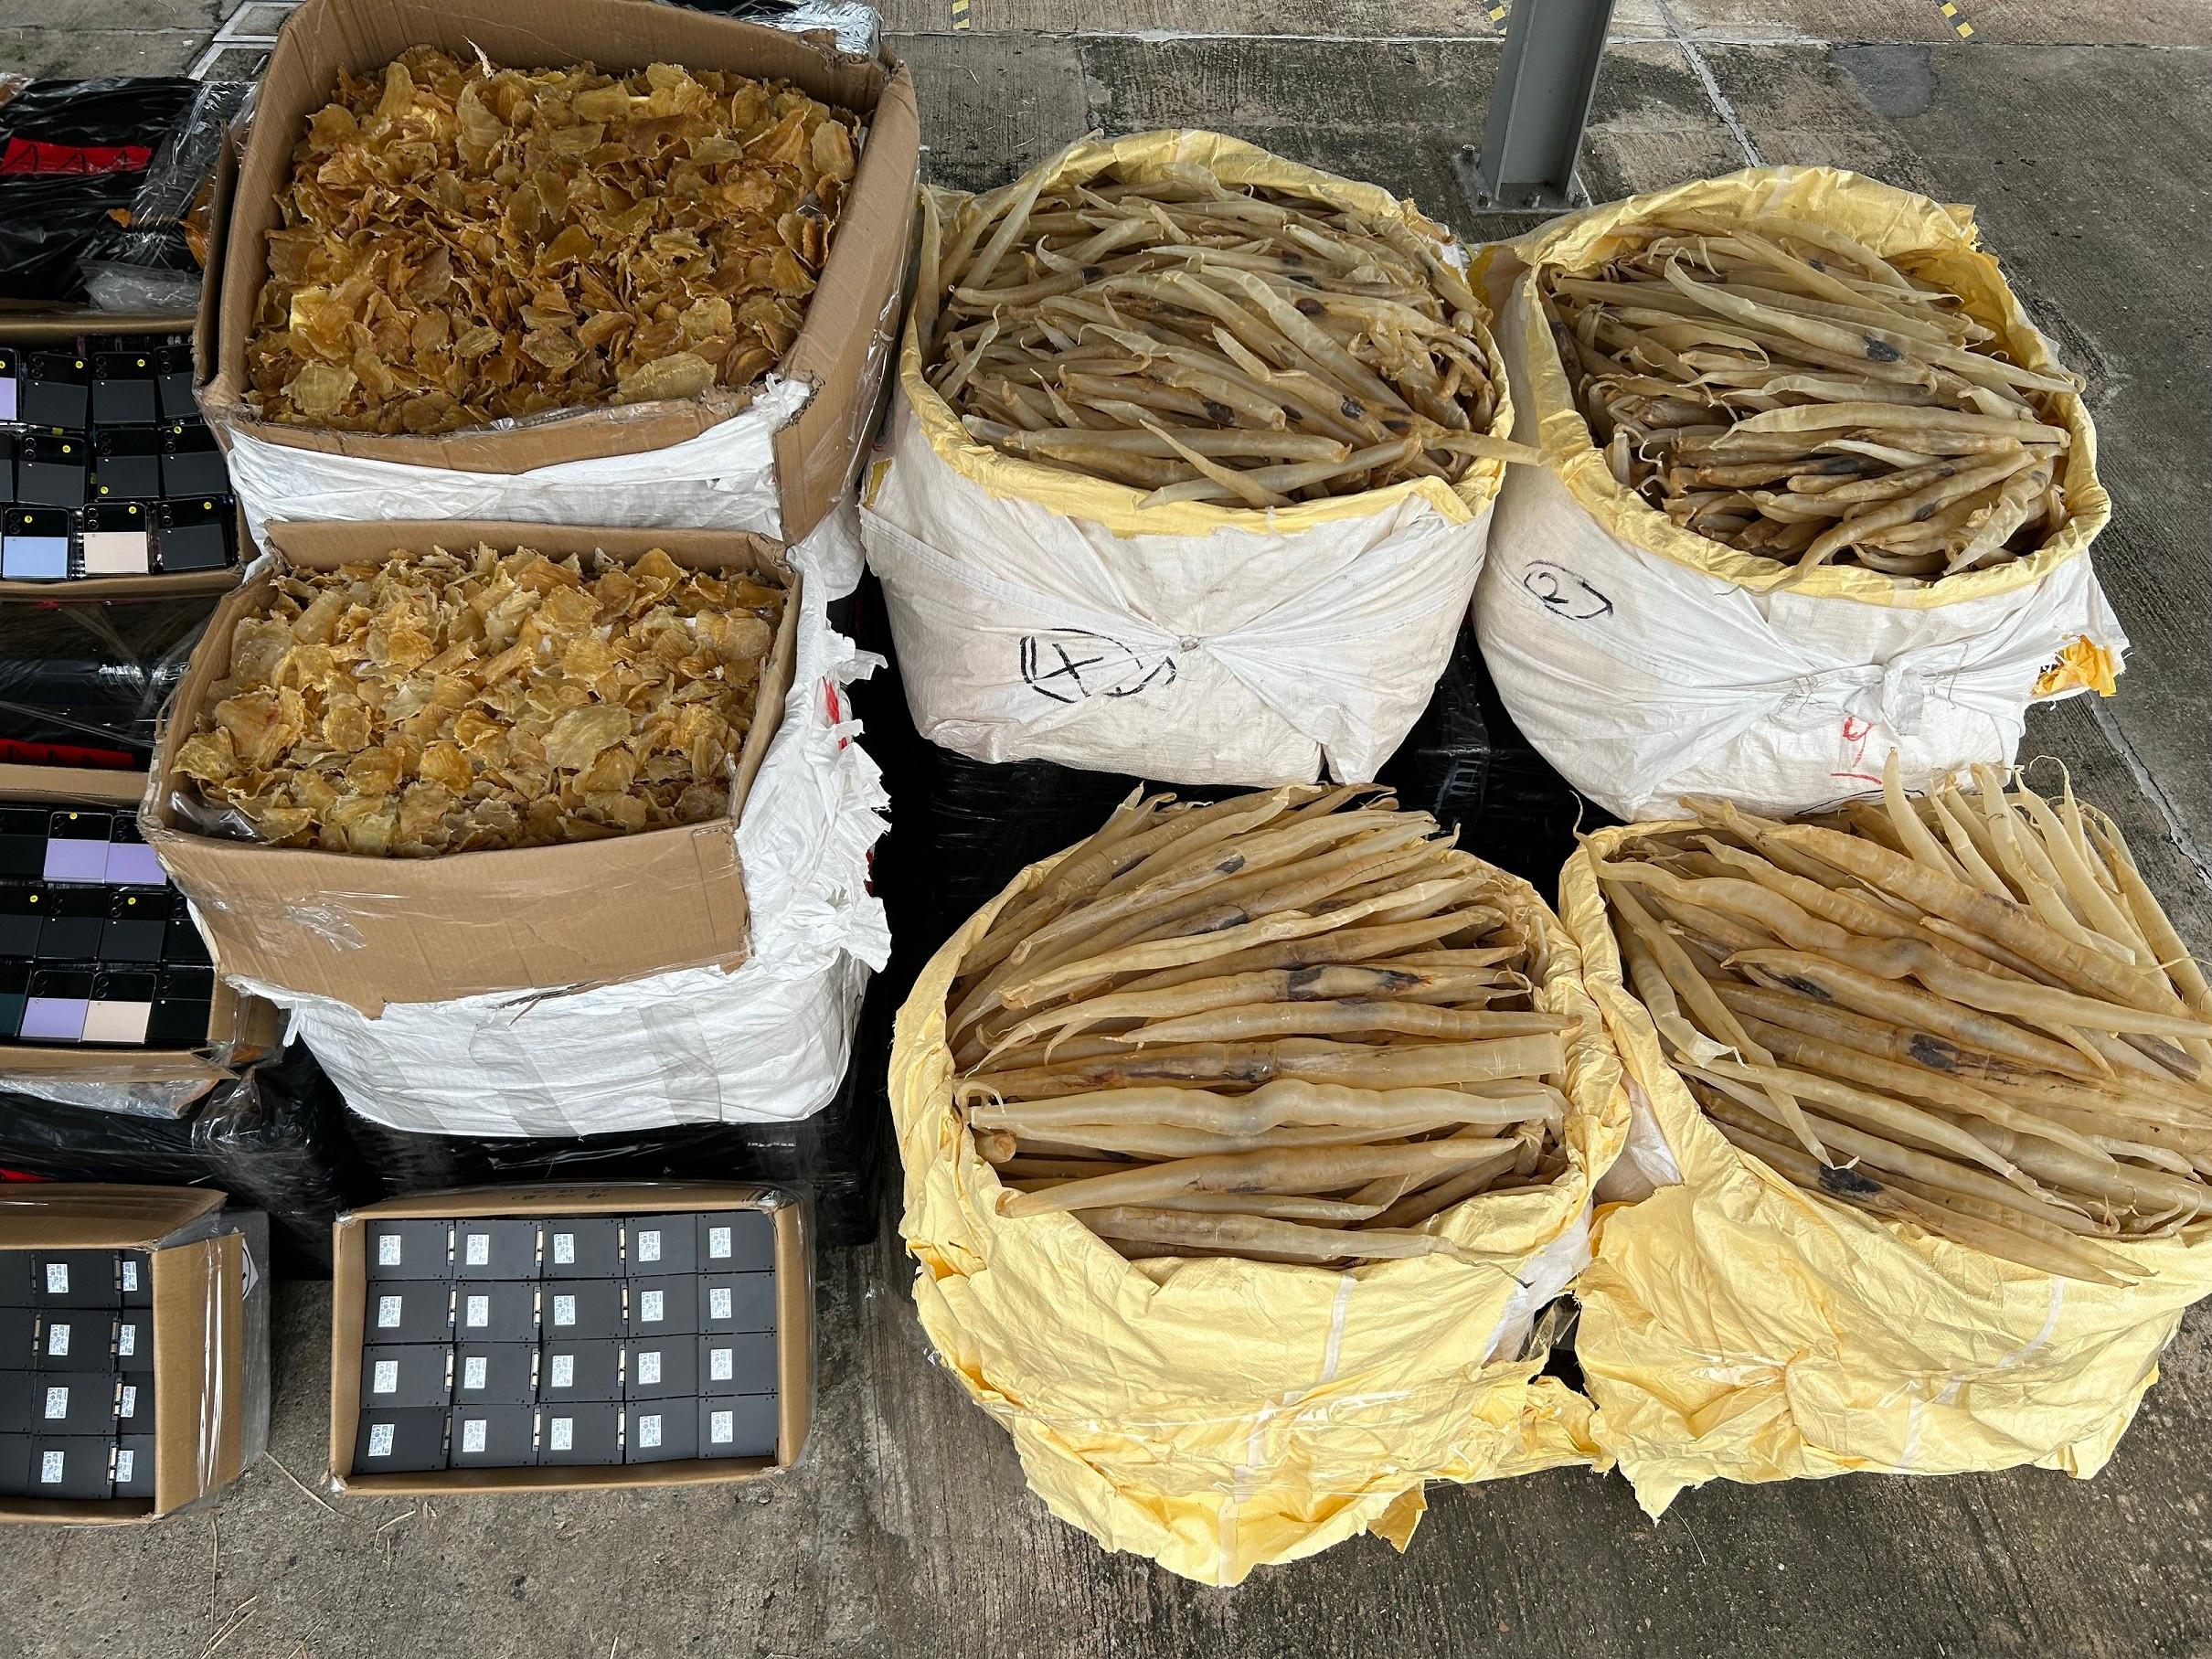 Hong Kong Customs yesterday (September 14) mounted an anti-smuggling operation in the Aberdeen Wholesale Fish Market and detected a suspected smuggling case involving a speedboat. A batch of suspected smuggled goods, with an estimated market value of about $11 million, was seized. Photo shows some of the suspected smuggled dried fish maws seized.